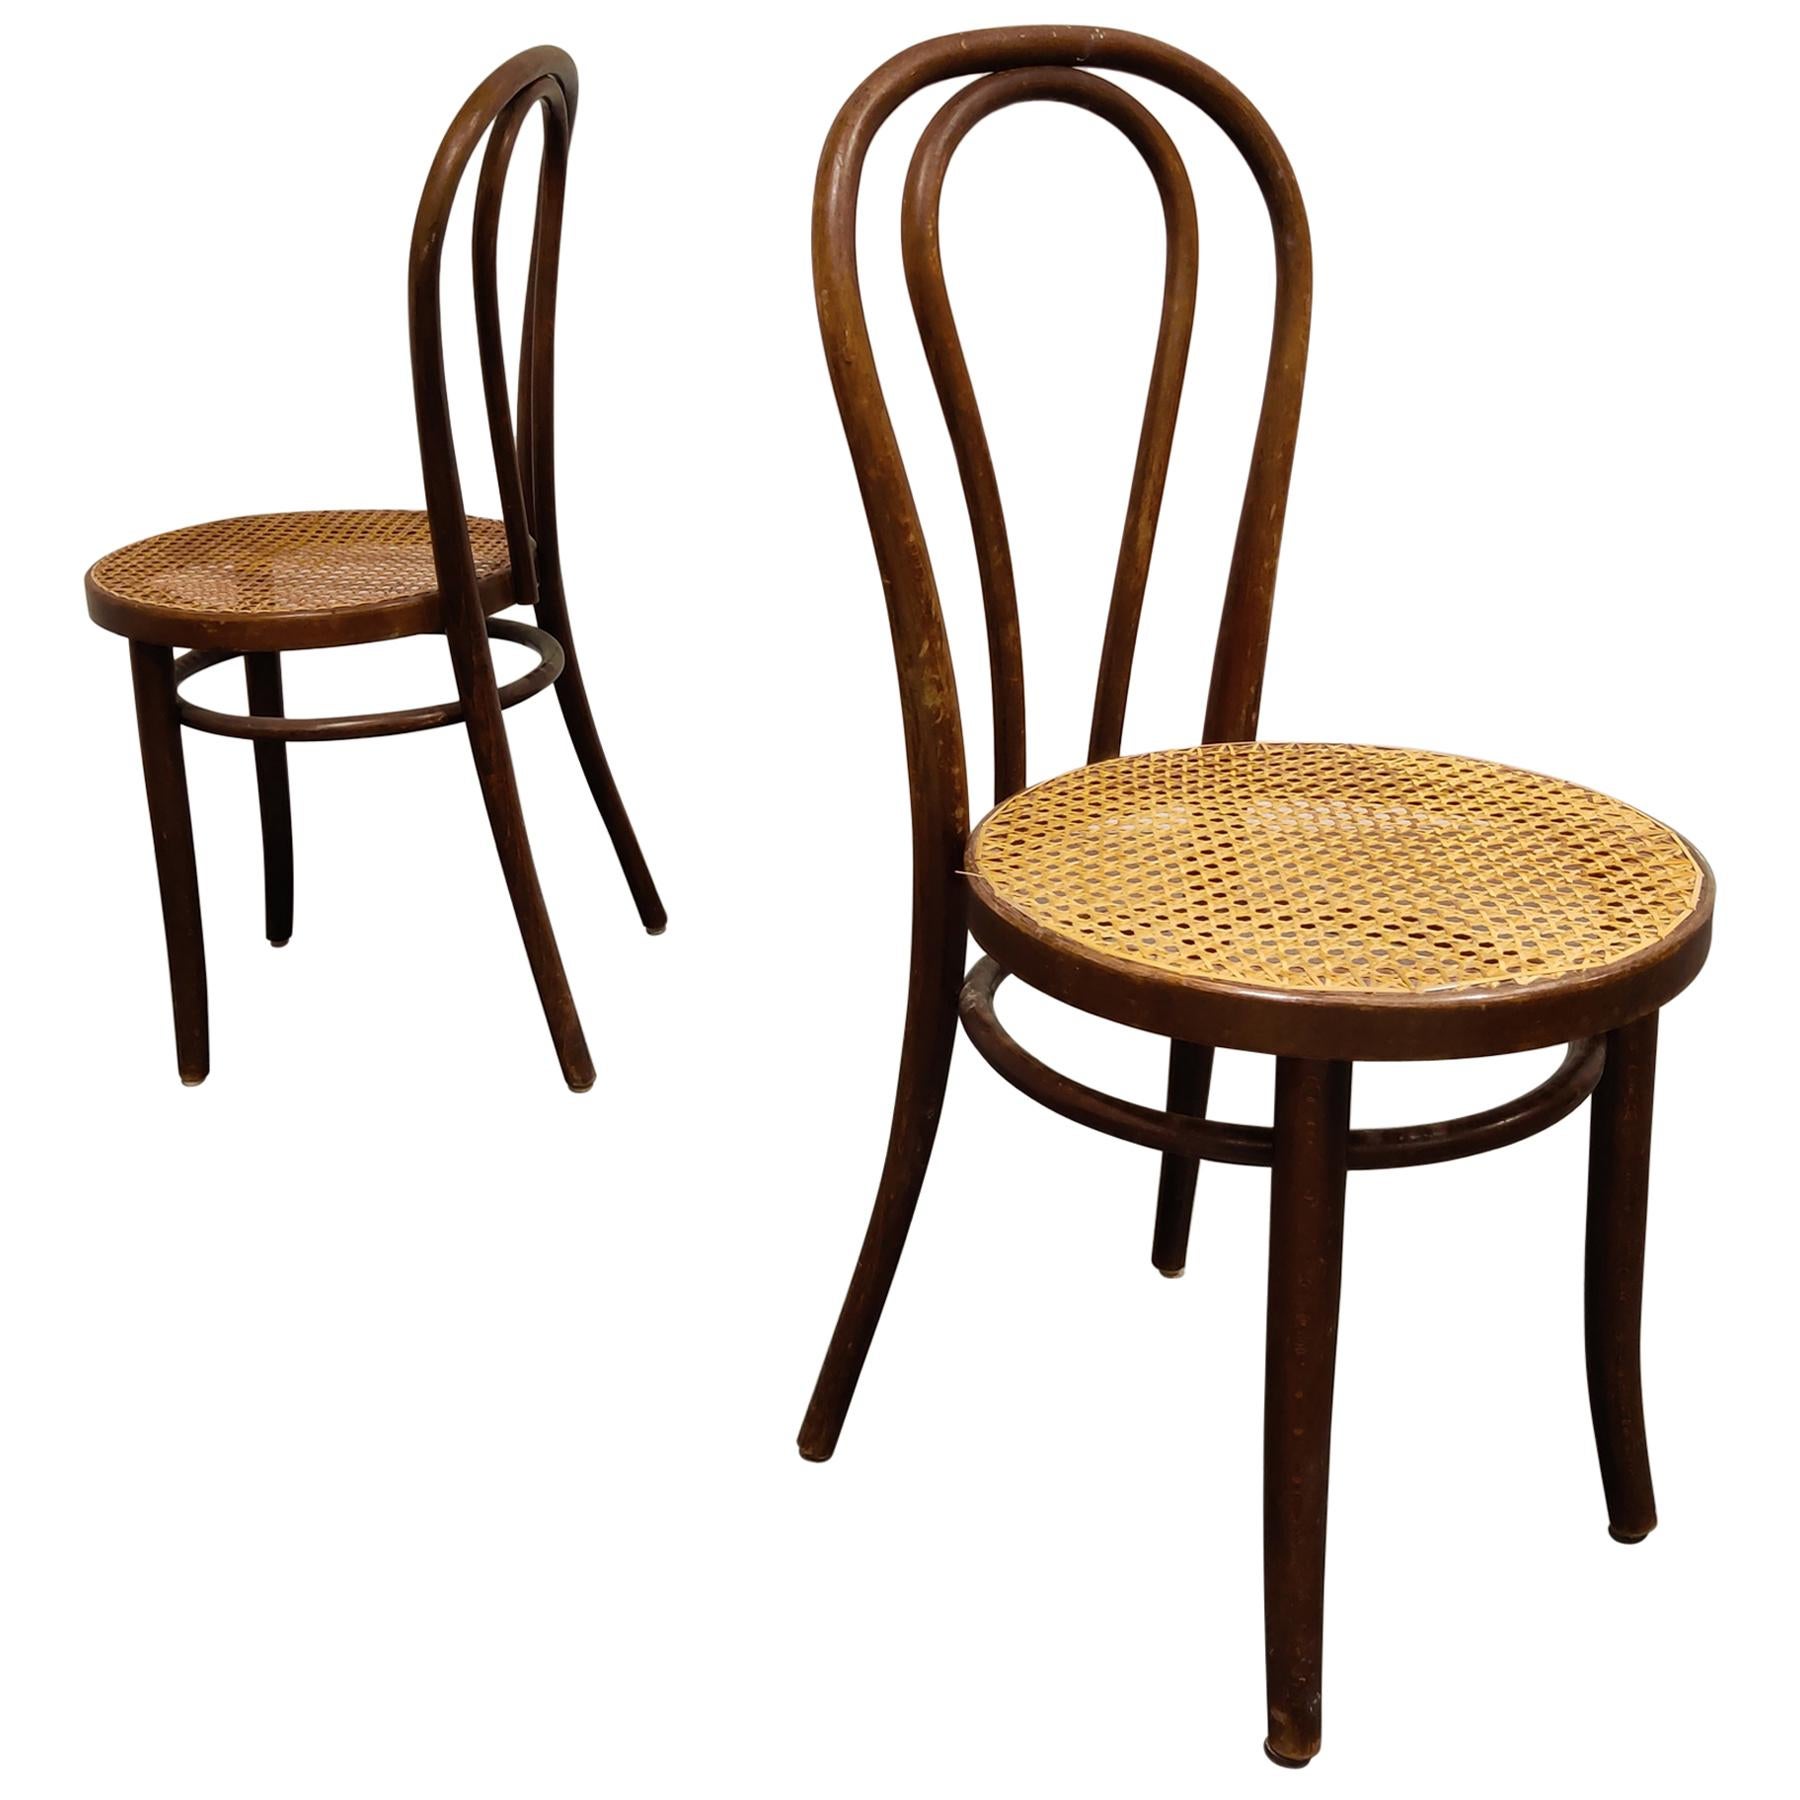 Pair of Antique Bentwood Dining Chairs, 1950s